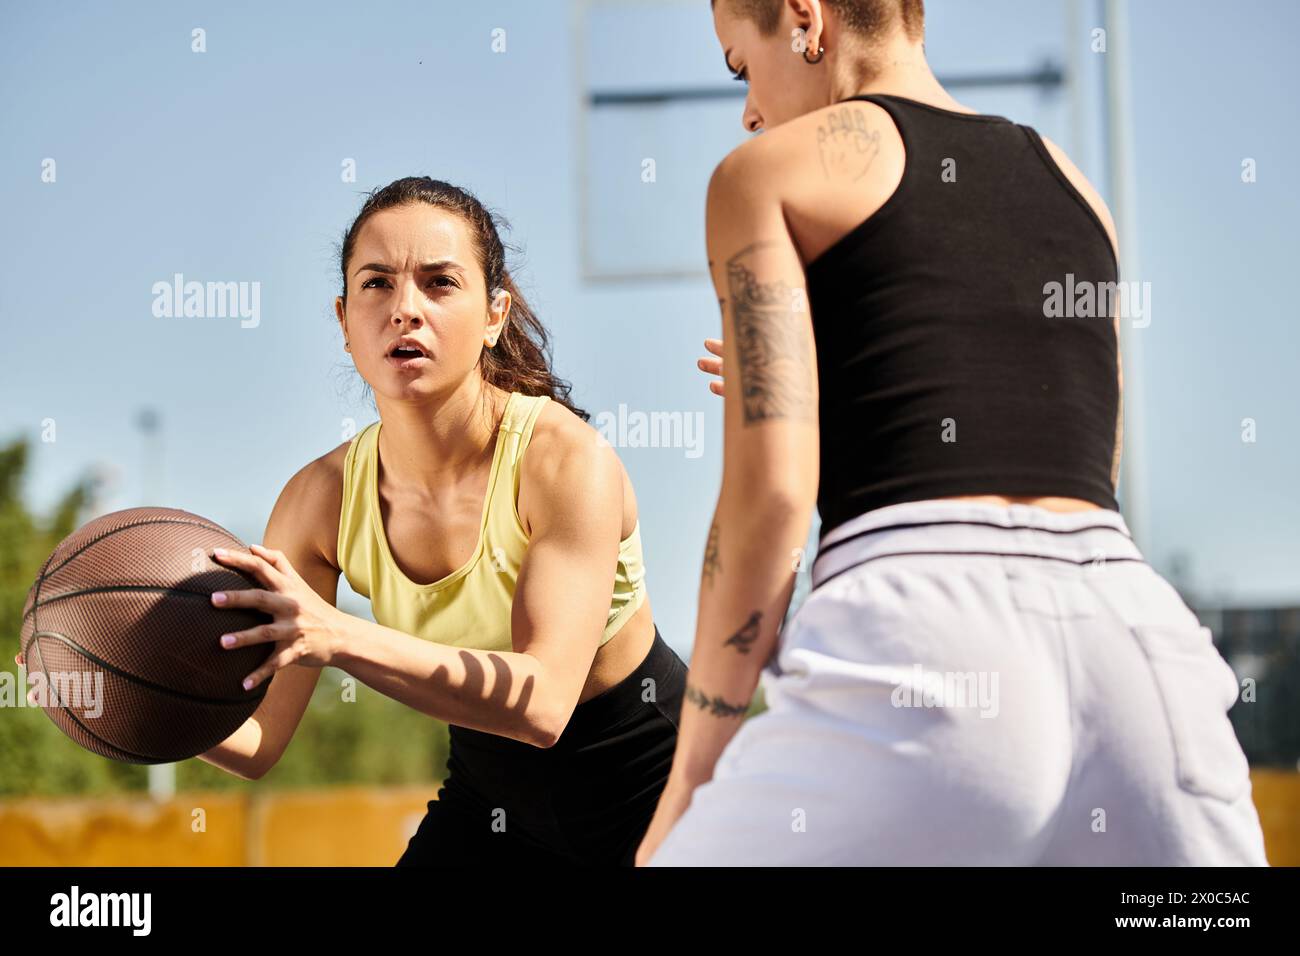 Two athletic young women standing outdoors, one holding a basketball, embodying friendship and sportsmanship on a sunny day. Stock Photo